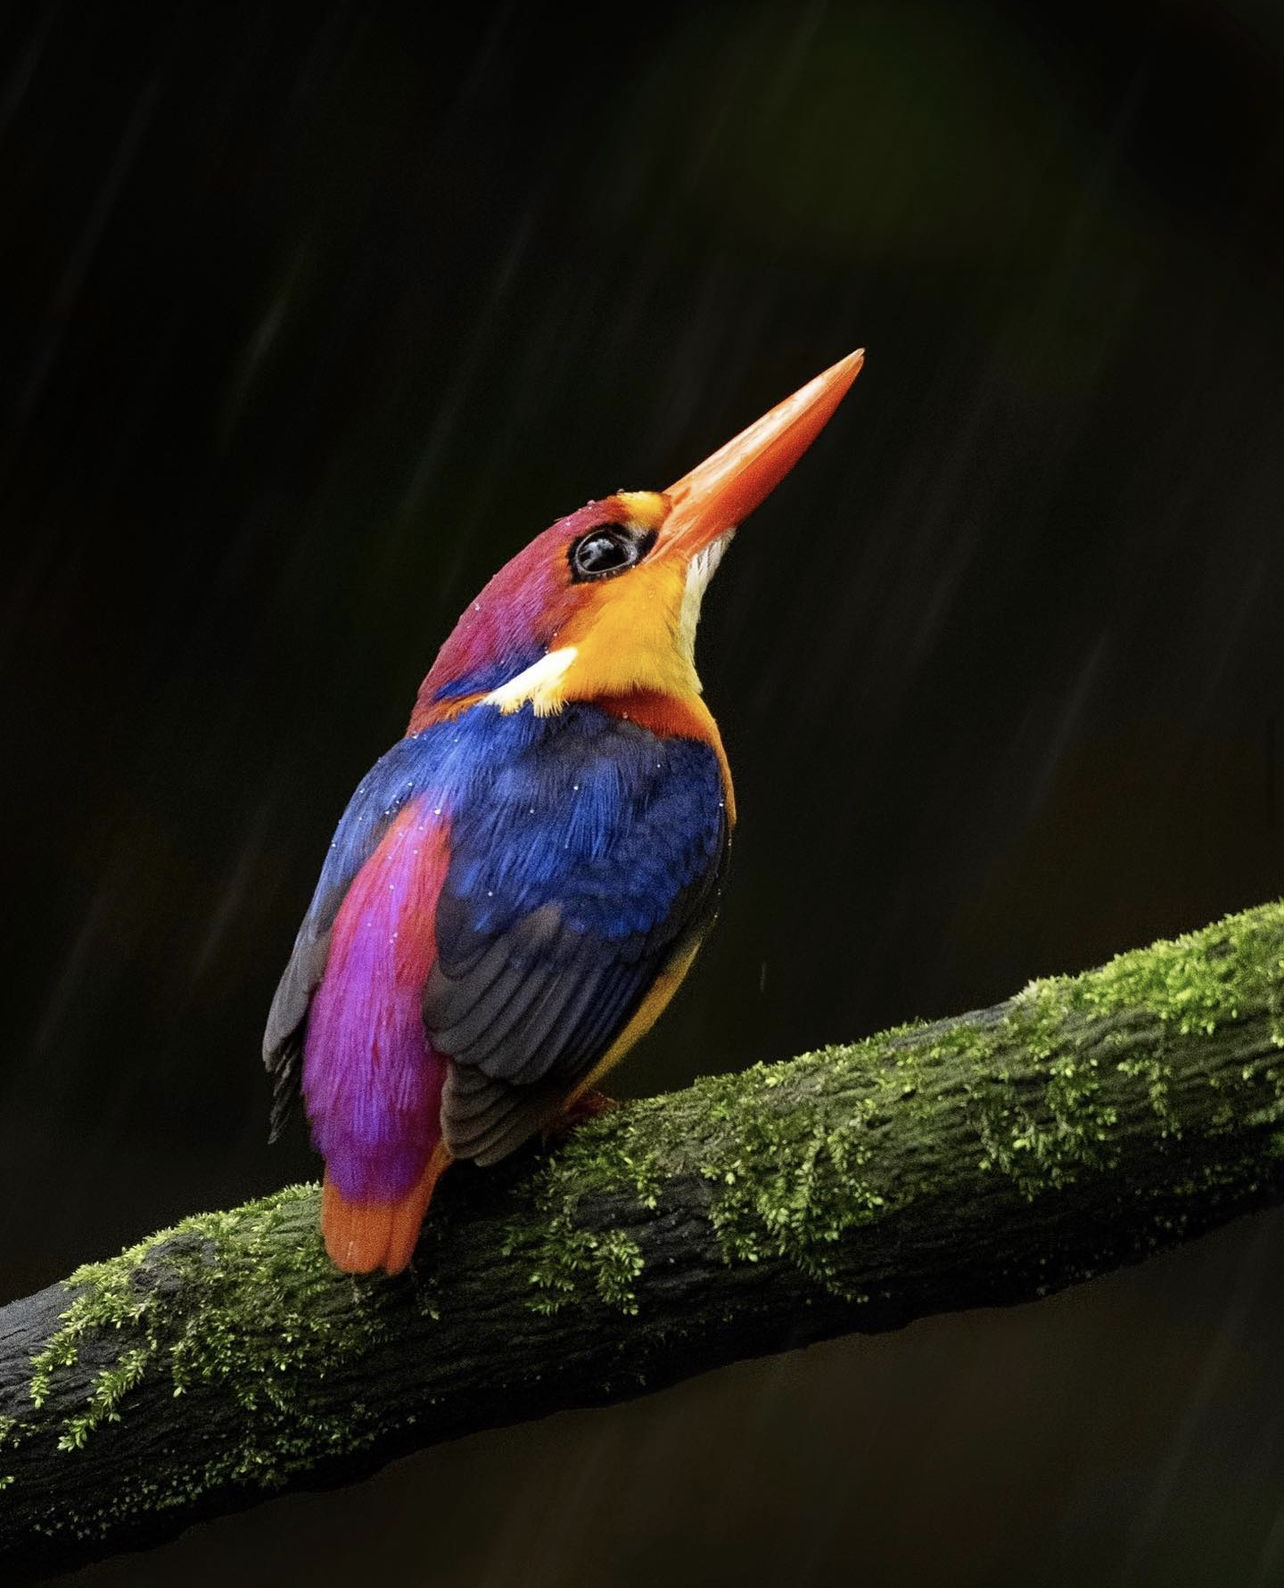 A bright purple, blue, and orange bird looks up as it sits on a branch in the rain.